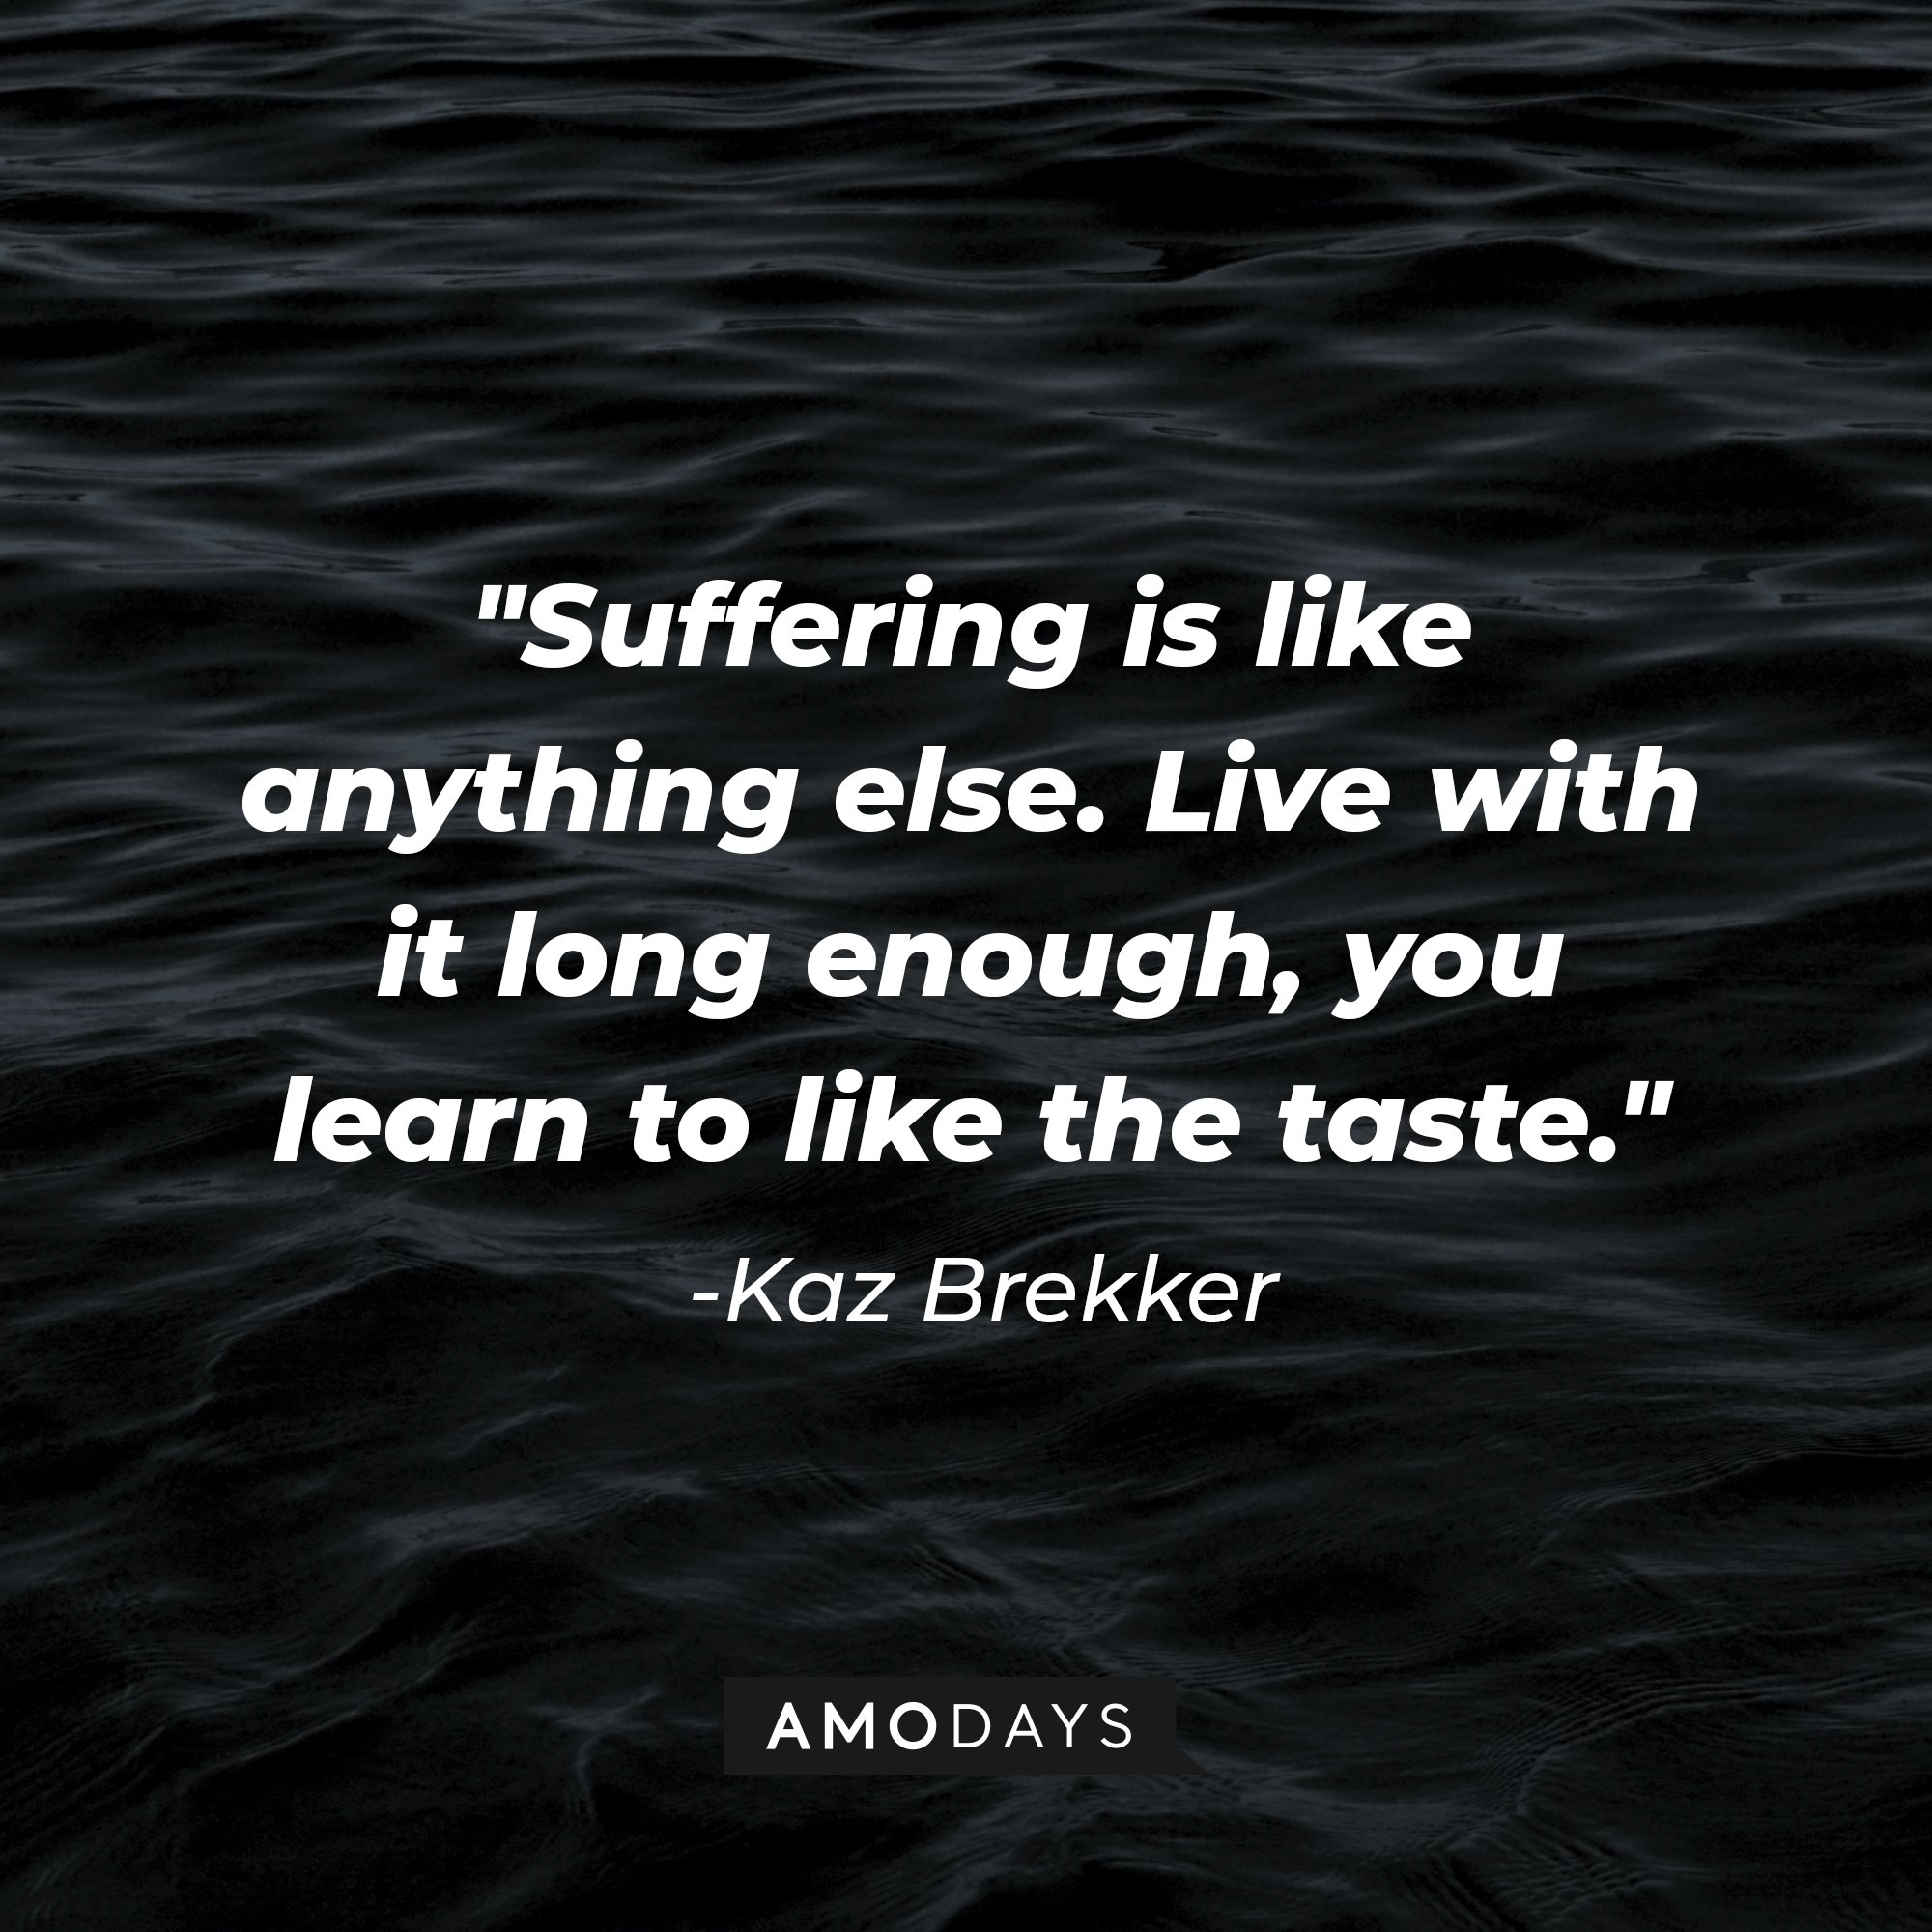 Kaz Brekker’s quote: "Suffering is like anything else. Live with it long enough; you learn to like the taste." | Image: AmoDays